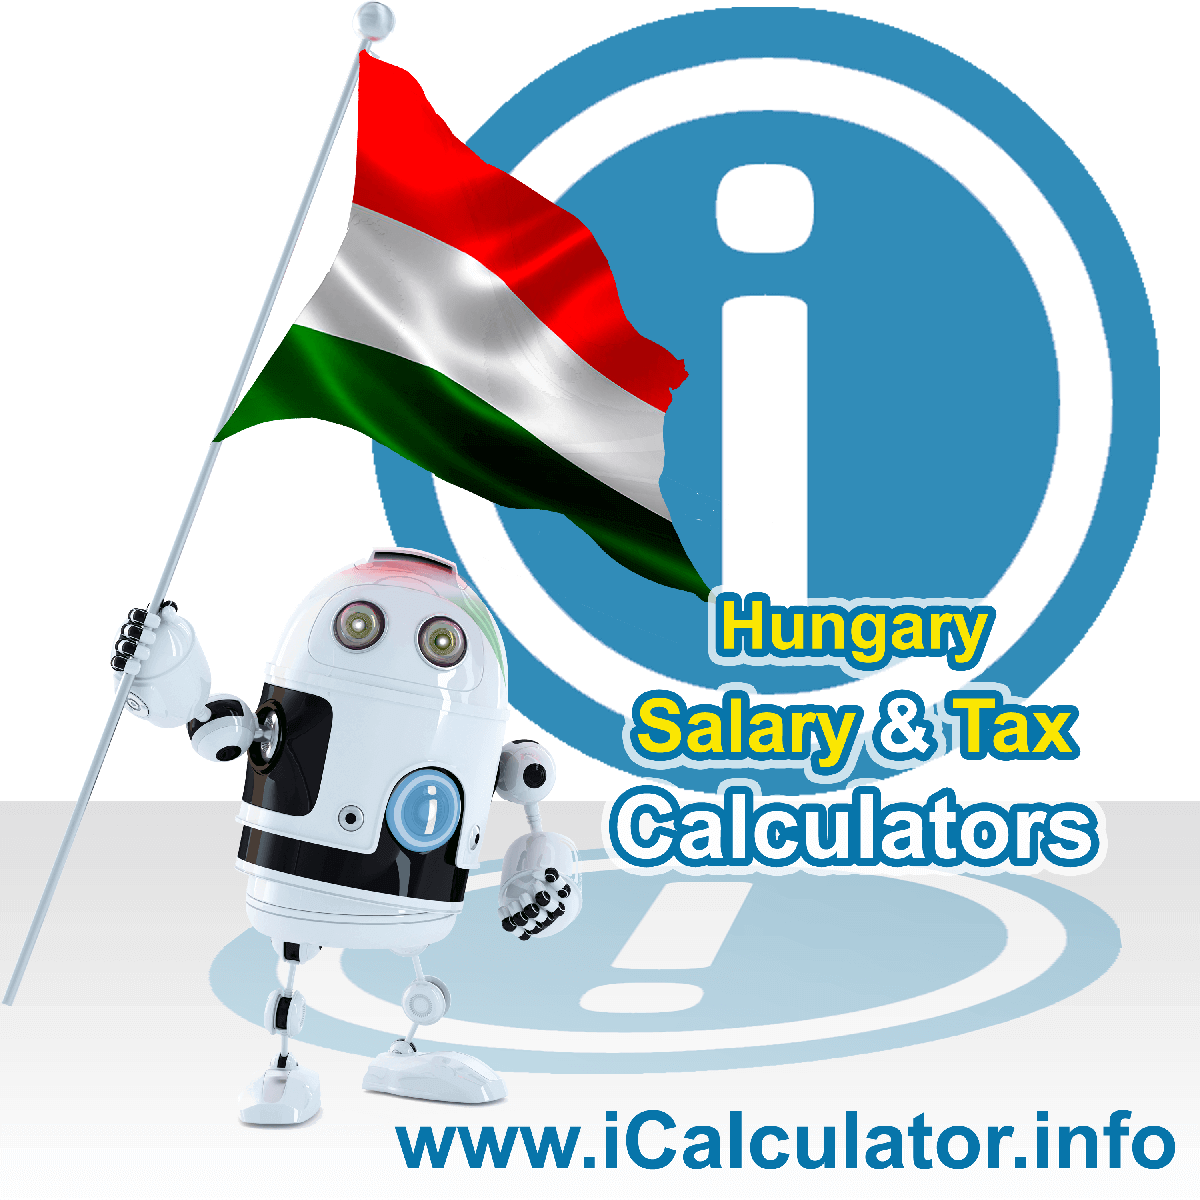 Hungary Salary Calculator. This image shows the Hungaryese flag and information relating to the tax formula for the Hungary Tax Calculator